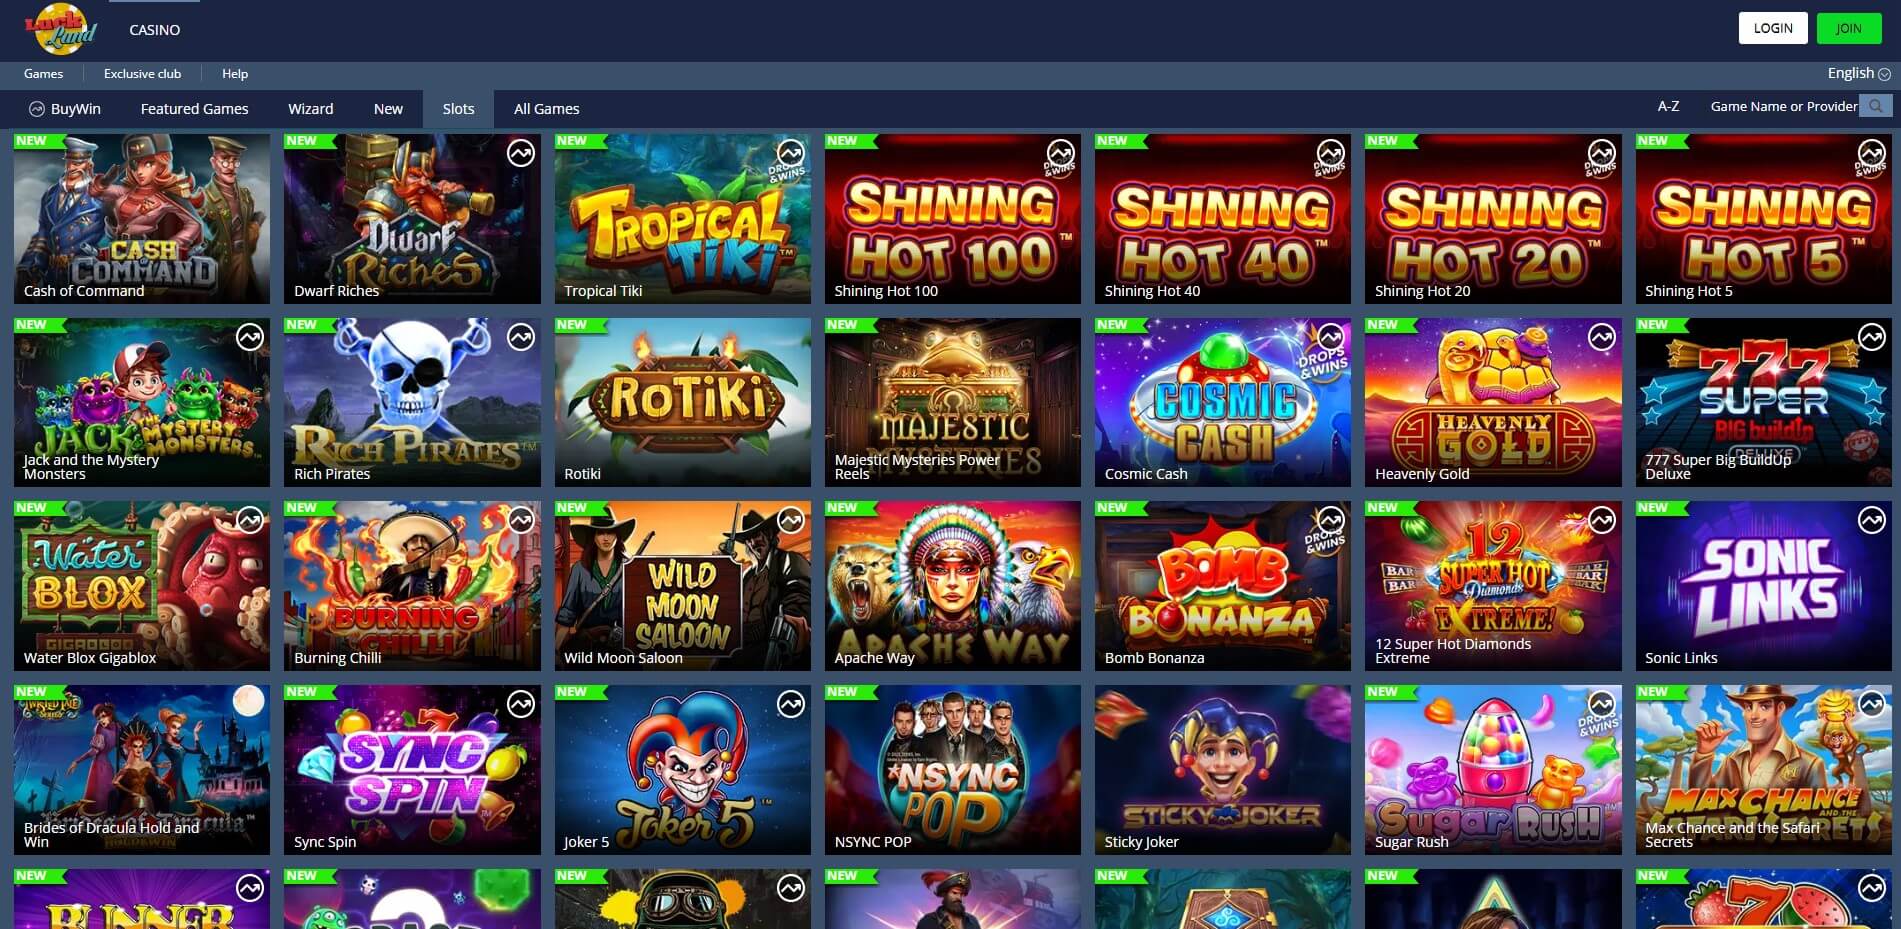 LuckLand Casino Games